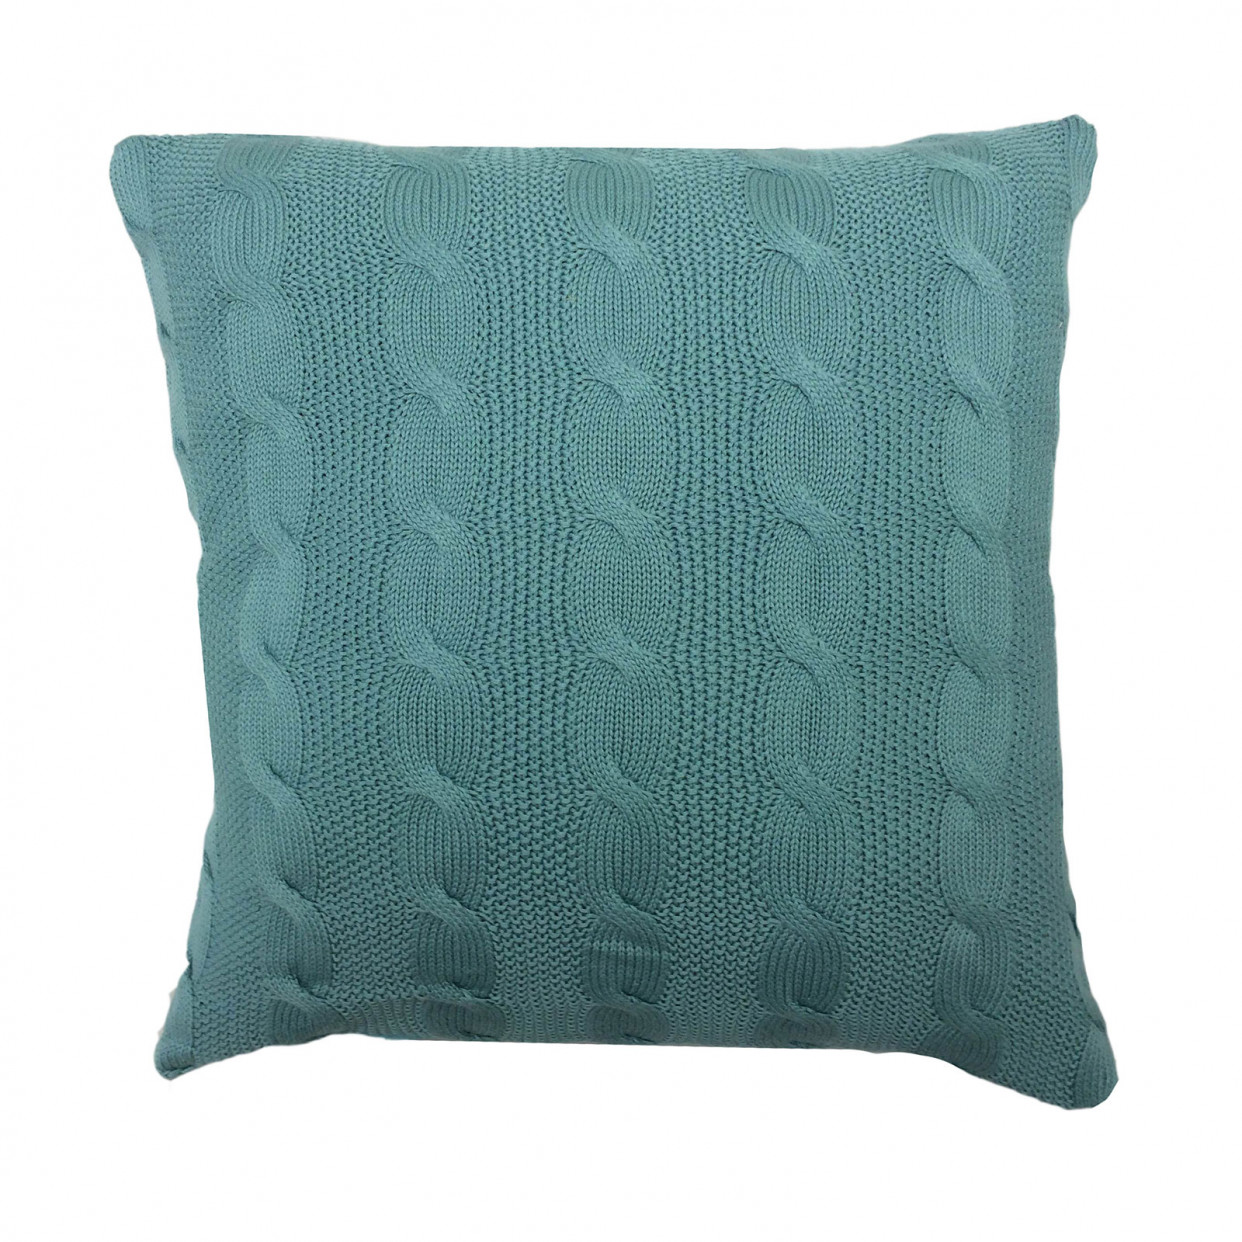 Highams Cable Knit 100% Cotton Cushion Cover>